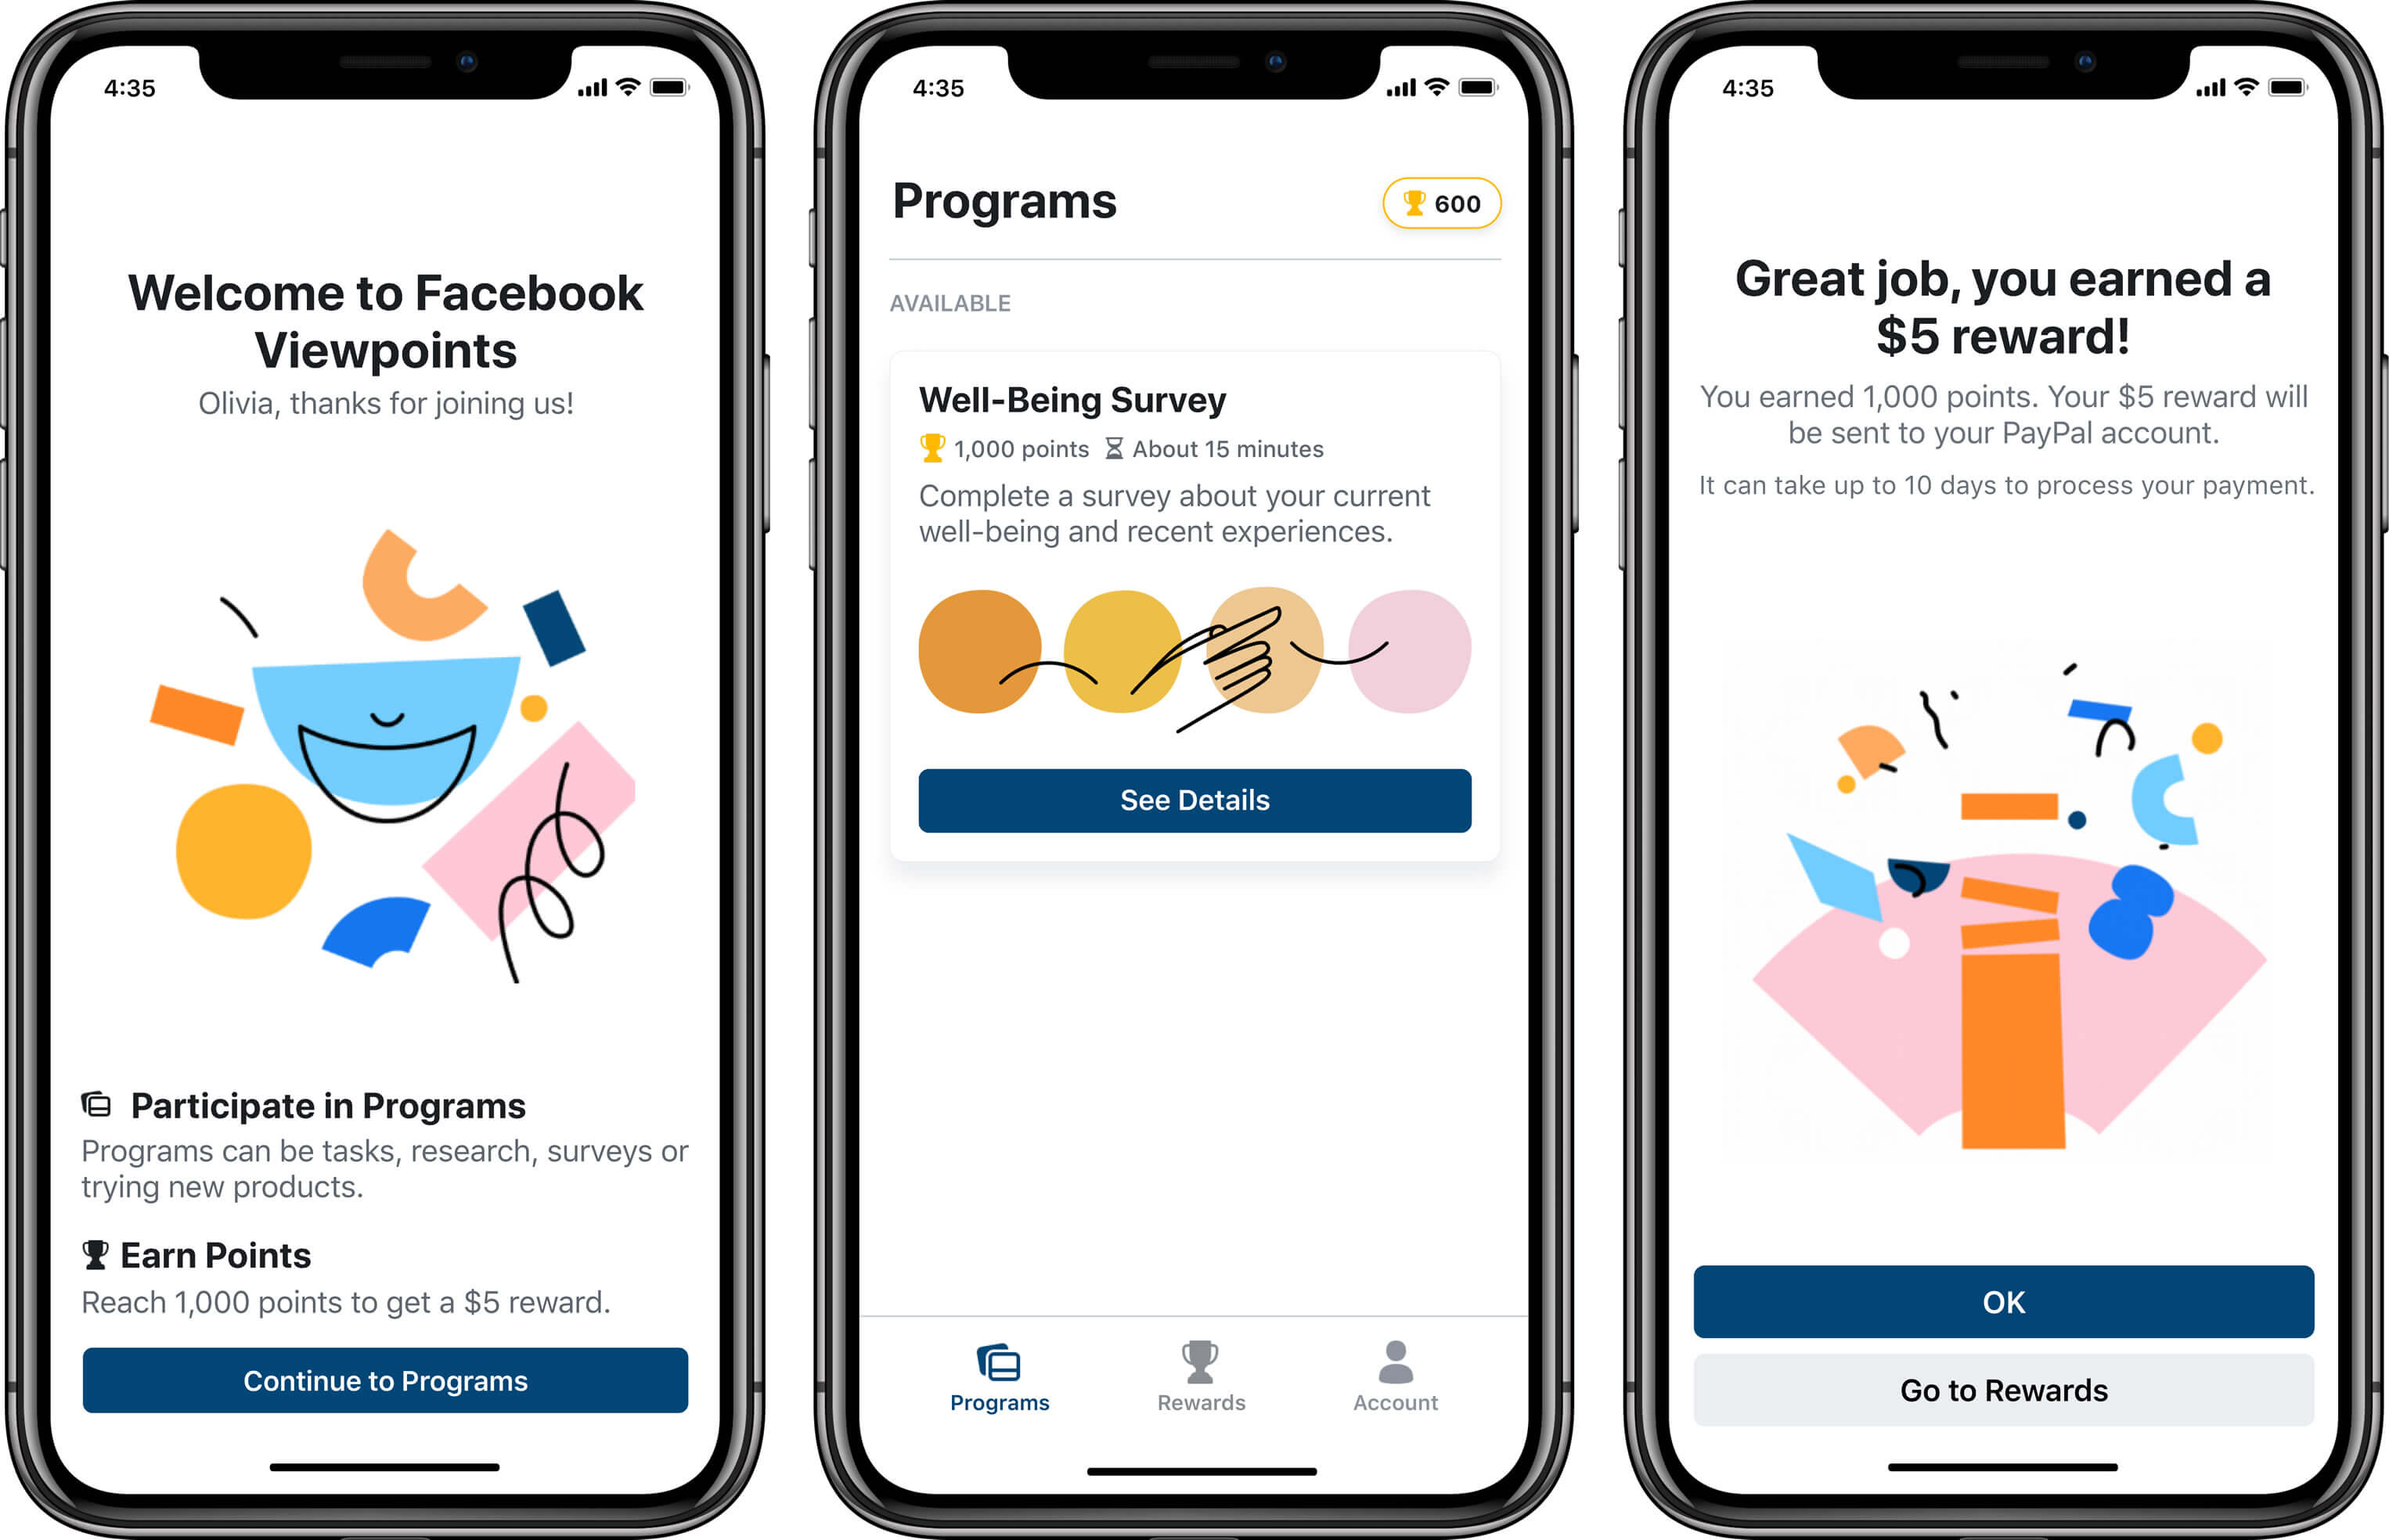 Facebook has a new market research app that pays users for their data